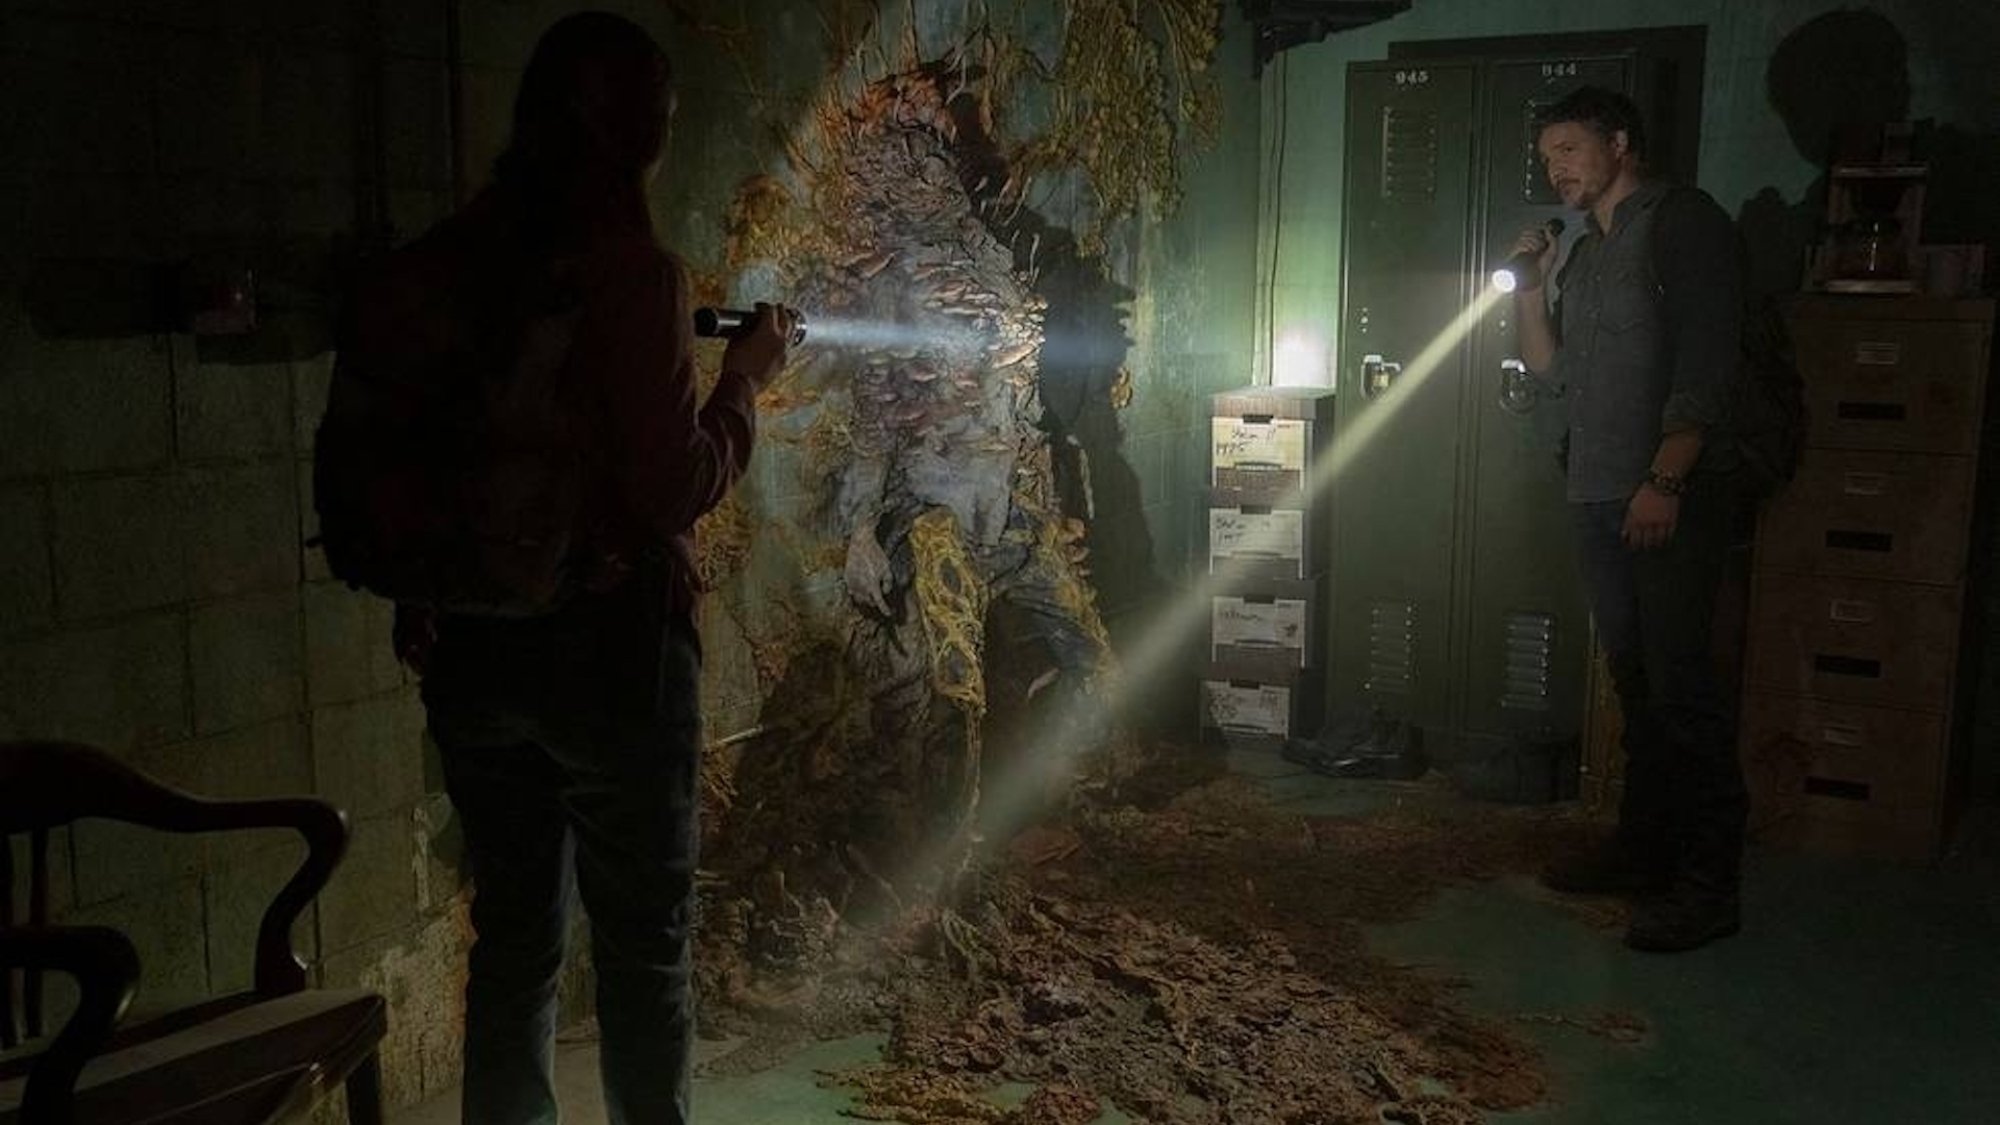 Two people with flashlights stand in a dark room with a fungal growth on the wall.